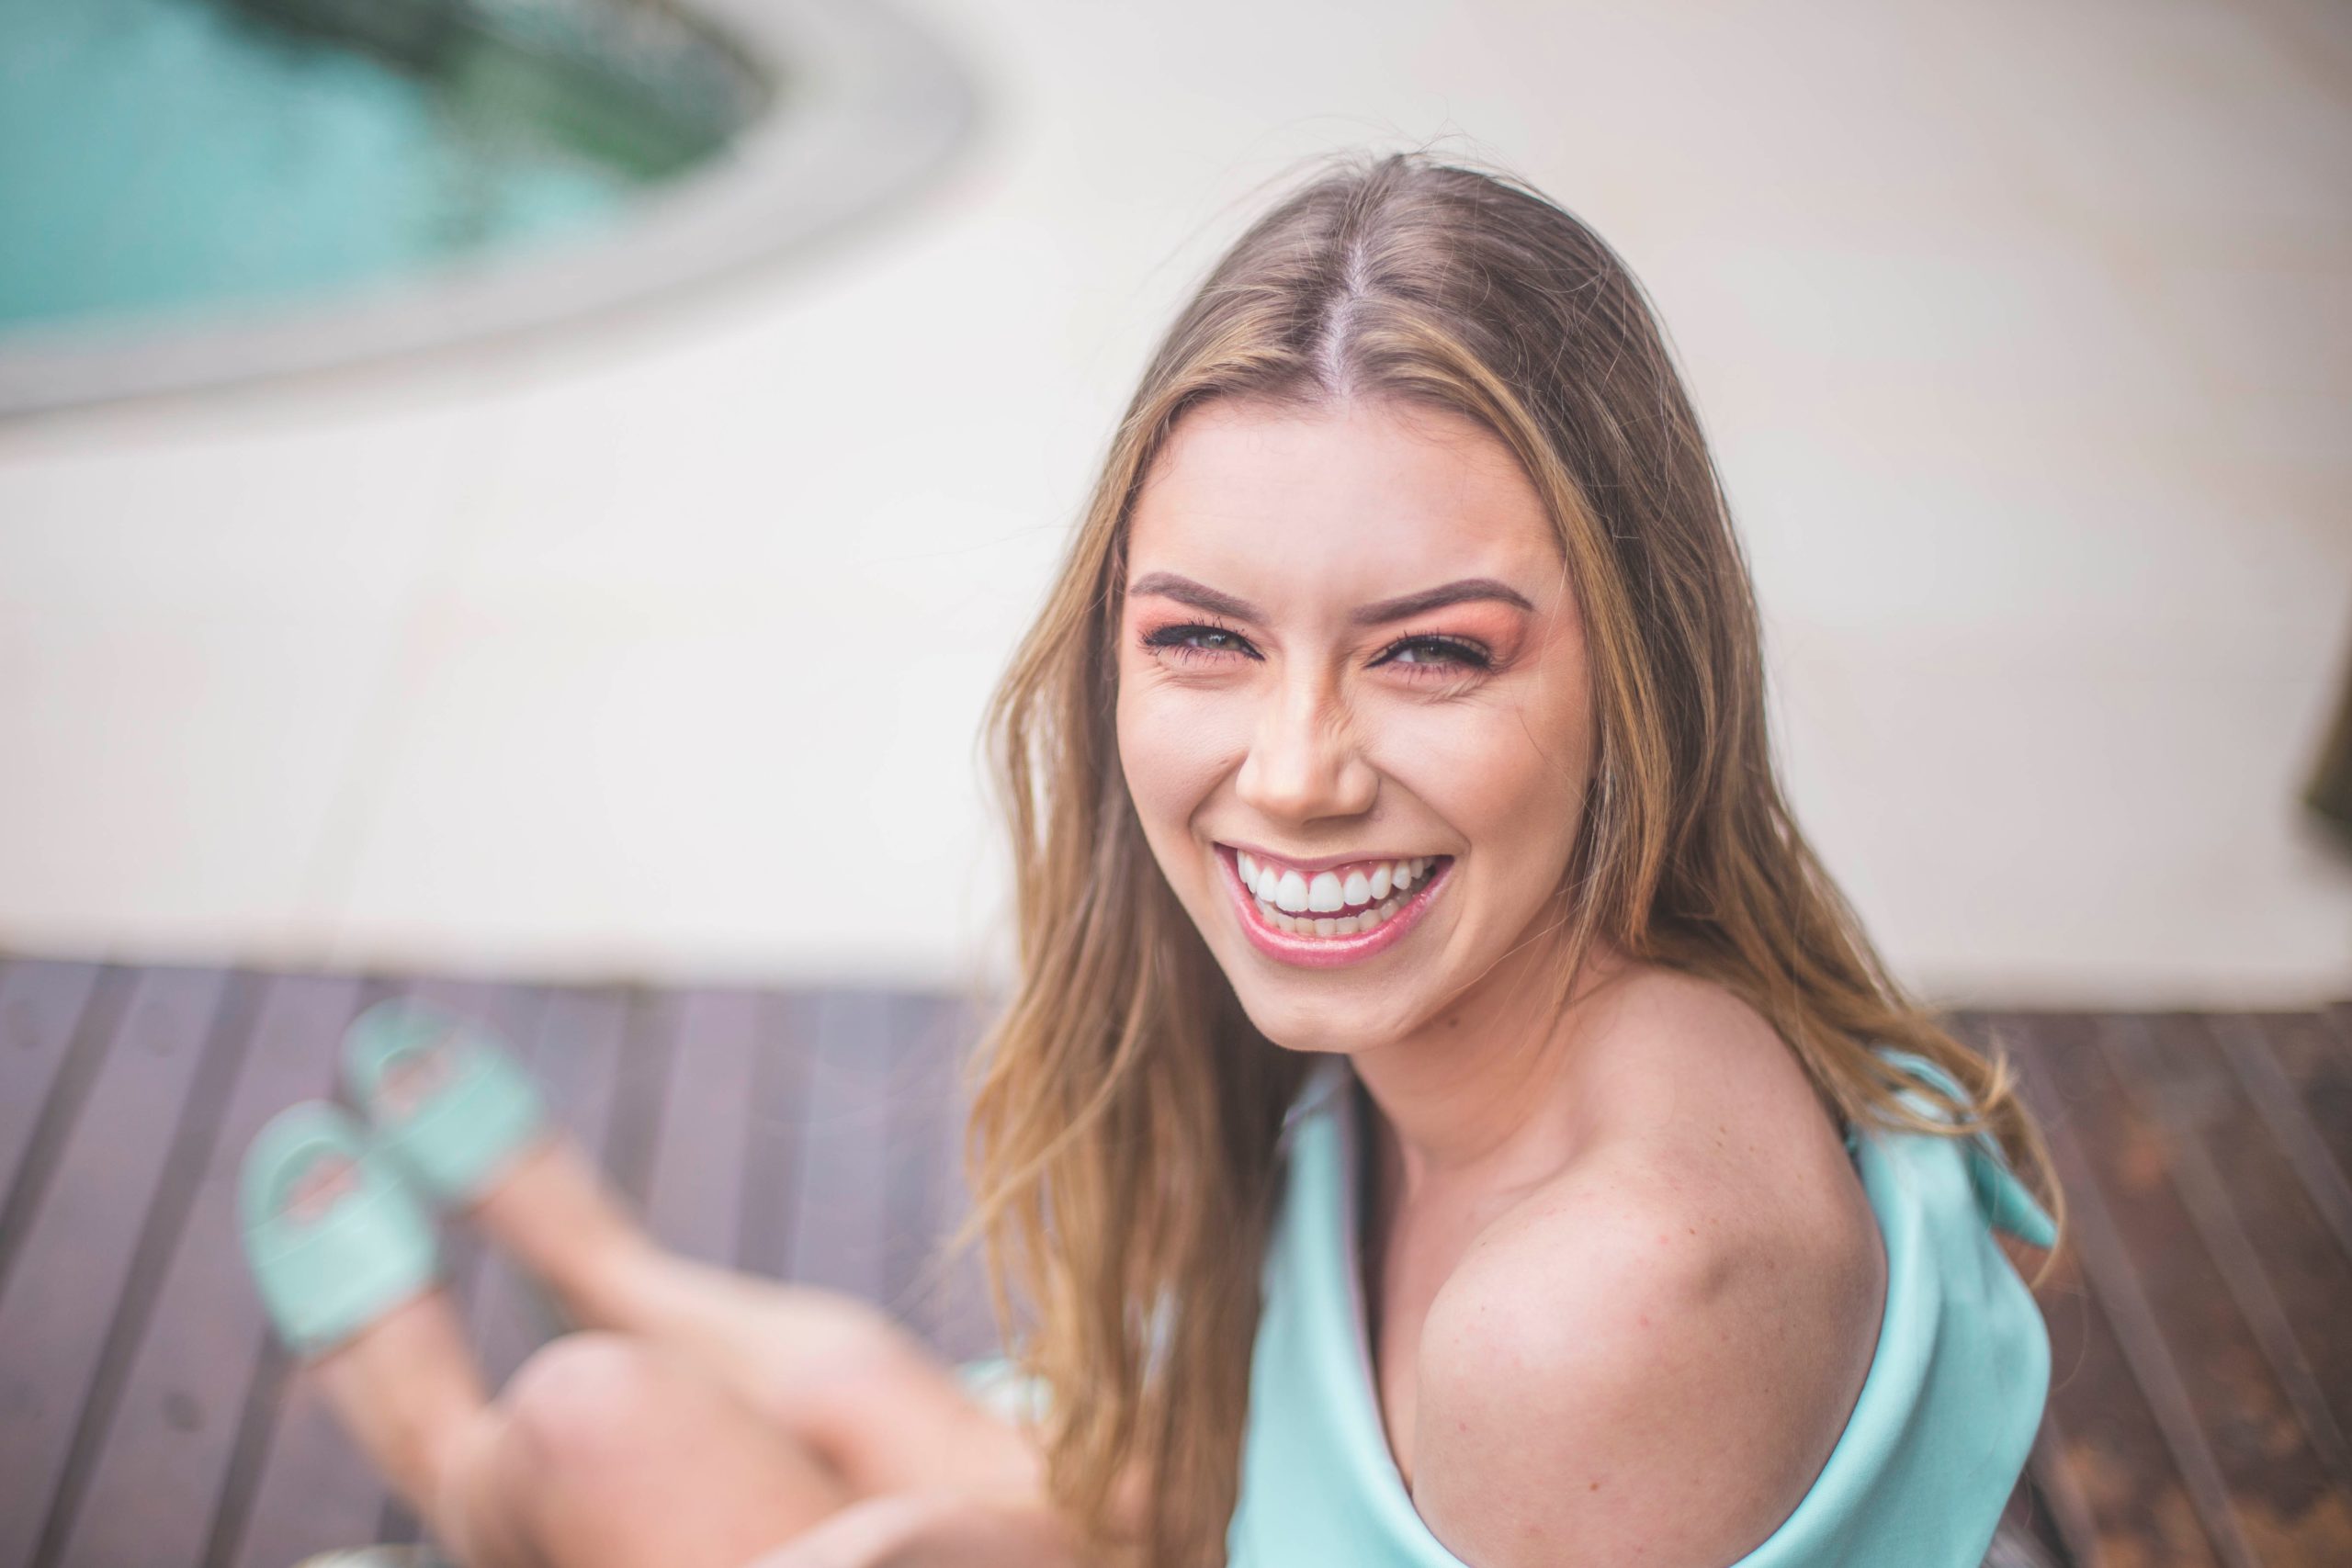 Does Natural Teeth Whitening Work?